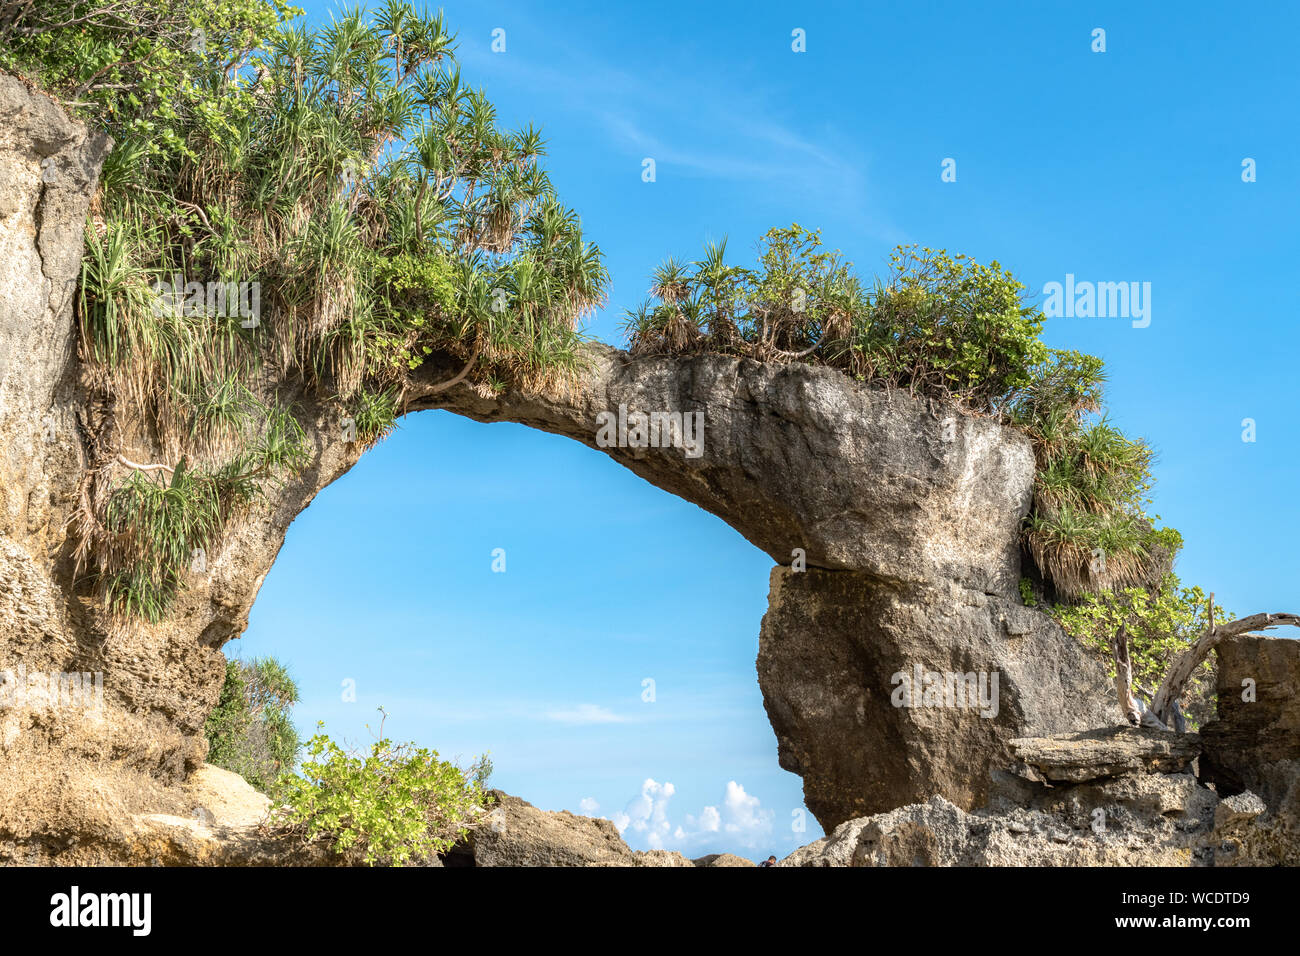 Natural Arch of Neil Island (Shaheed Dweep), a geological Arch Rock formation, locally known as Howrah Bridge. Clear Pristine blue sky adds more drama Stock Photo